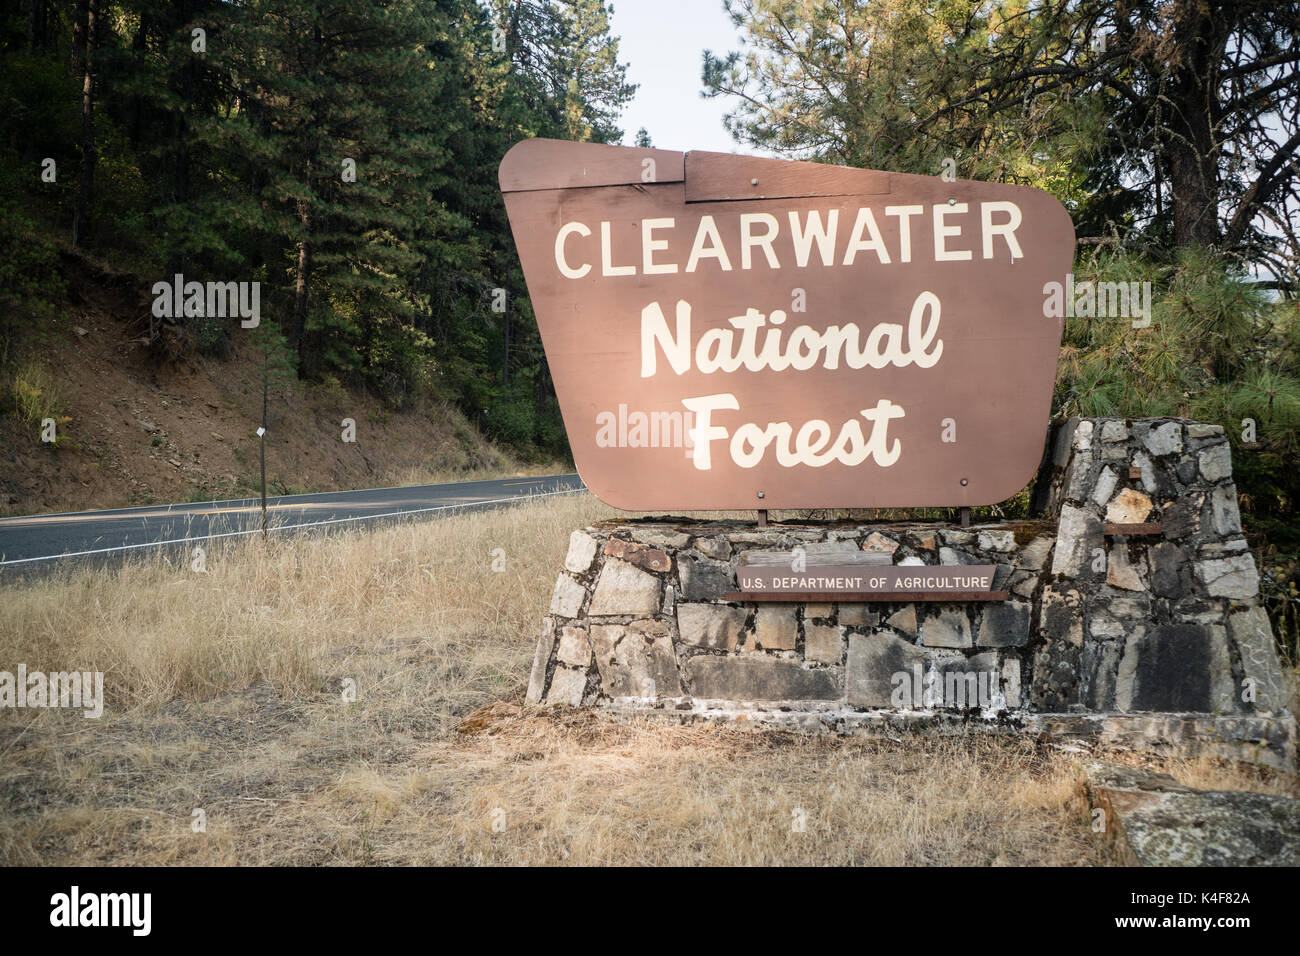 Spettatore entra la Clearwater National Forest Foto Stock